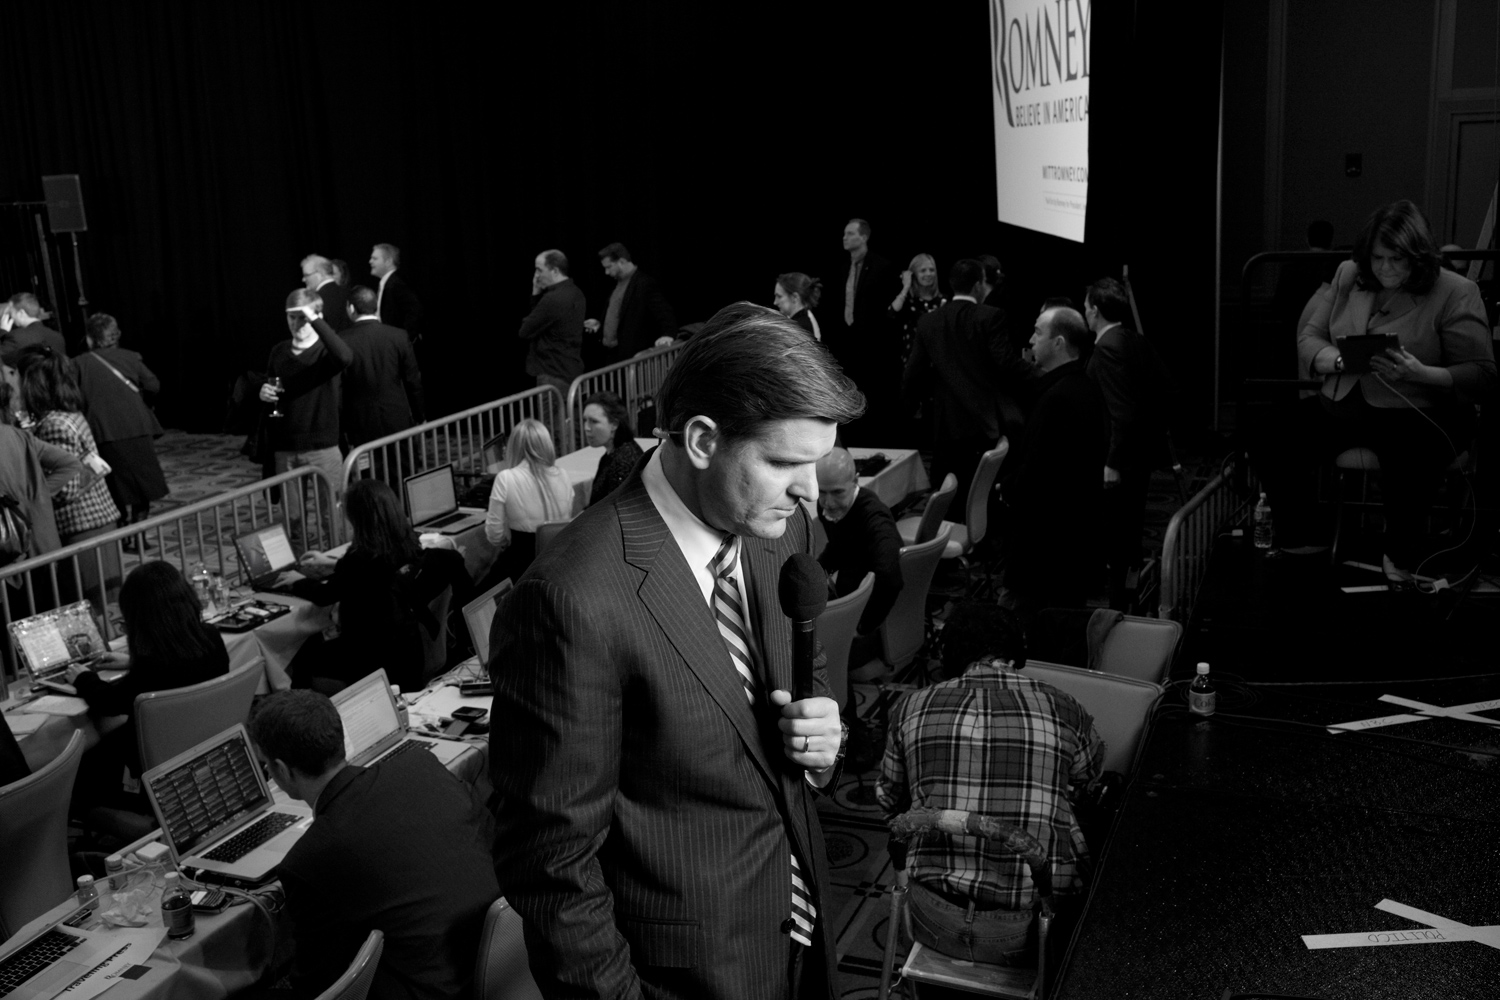 March 6, 2012. Mitt Romney supporters at a Super Tuesday event at the Westin Copley Place in Boston.